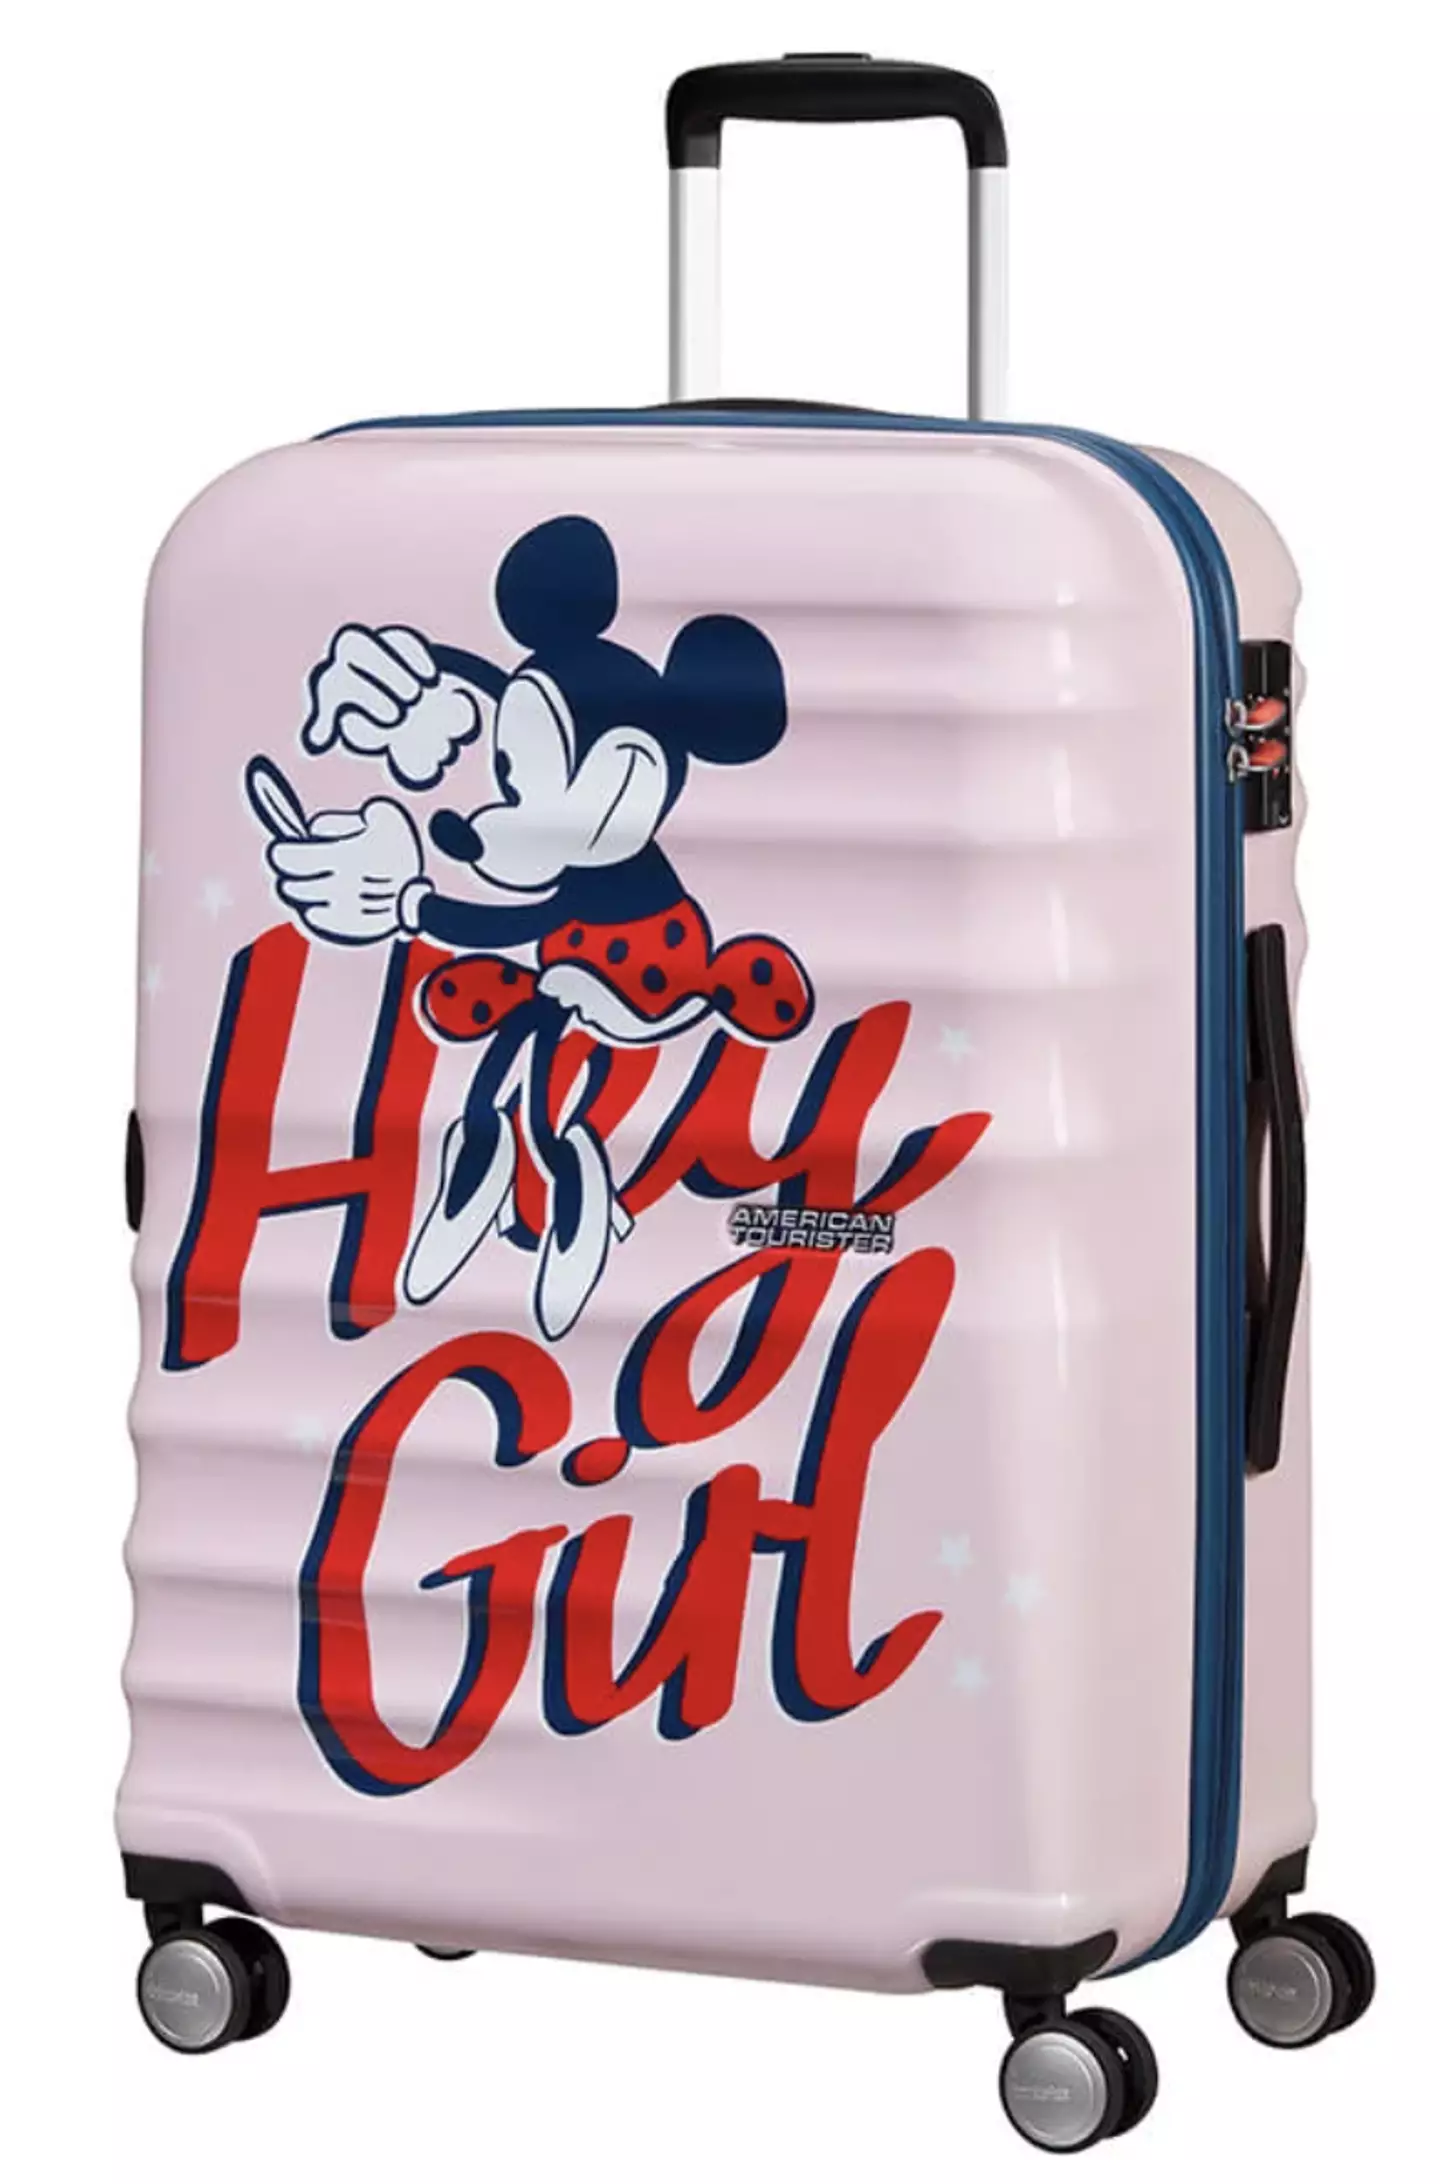 The Minnie Mouse suitcase is available to buy from Tesco (